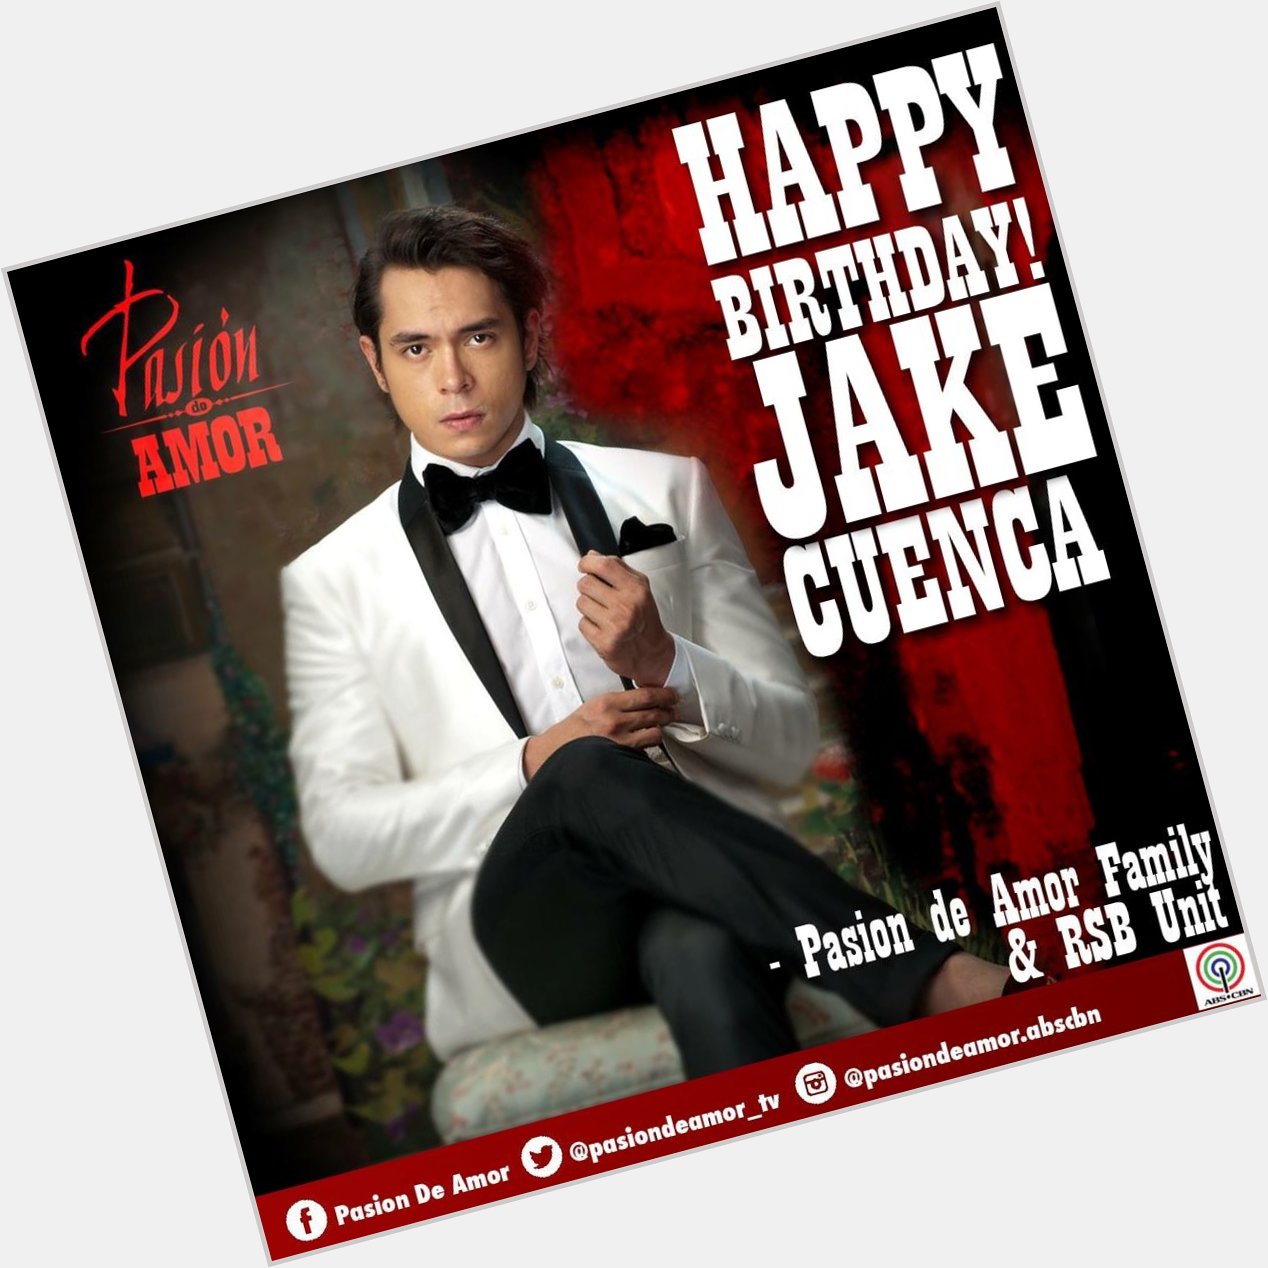 Maligayang Pagbati kay Jake Cuenca! Happy Birthday from your Pasion de Amor Family and RSB Unit! 